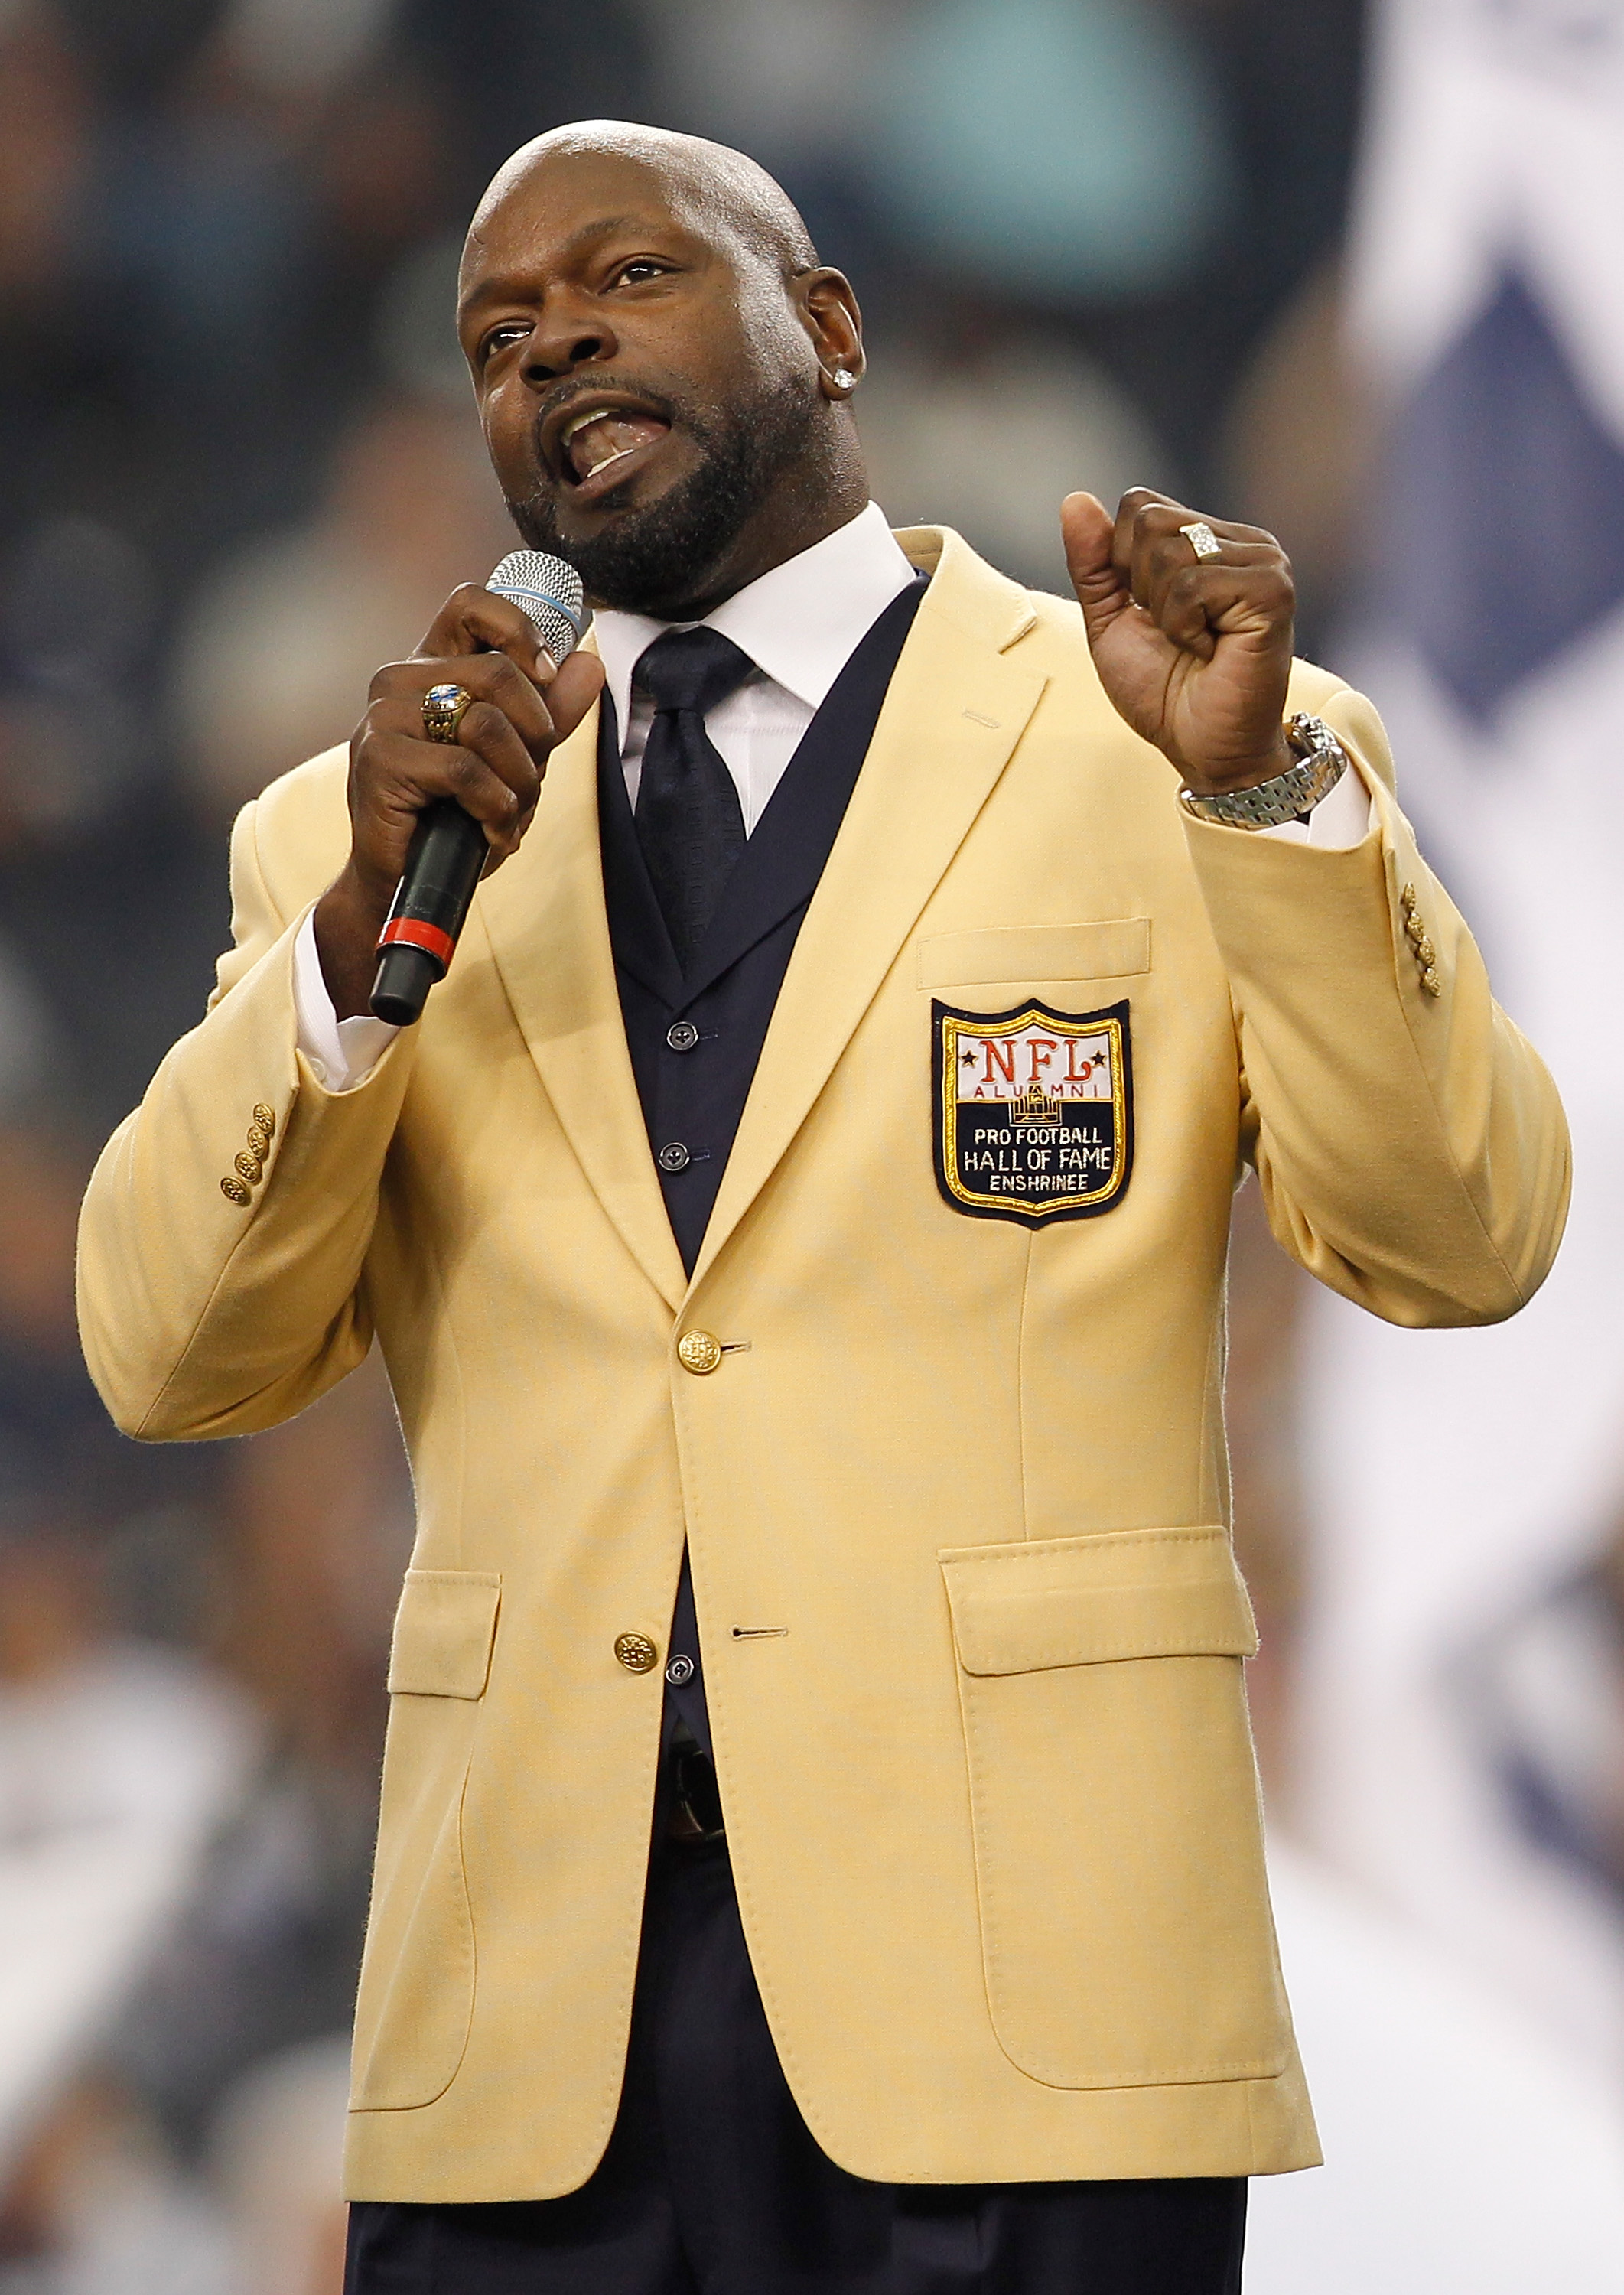 ARLINGTON, TX - NOVEMBER 21:  Former Cowboys running back Emmitt Smith gives and acceptance speach after receiving his Hall of Fame ring during a halftime ceremony at Cowboys Stadium on November 21, 2010 in Arlington, Texas.  (Photo by Tom Pennington/Gett